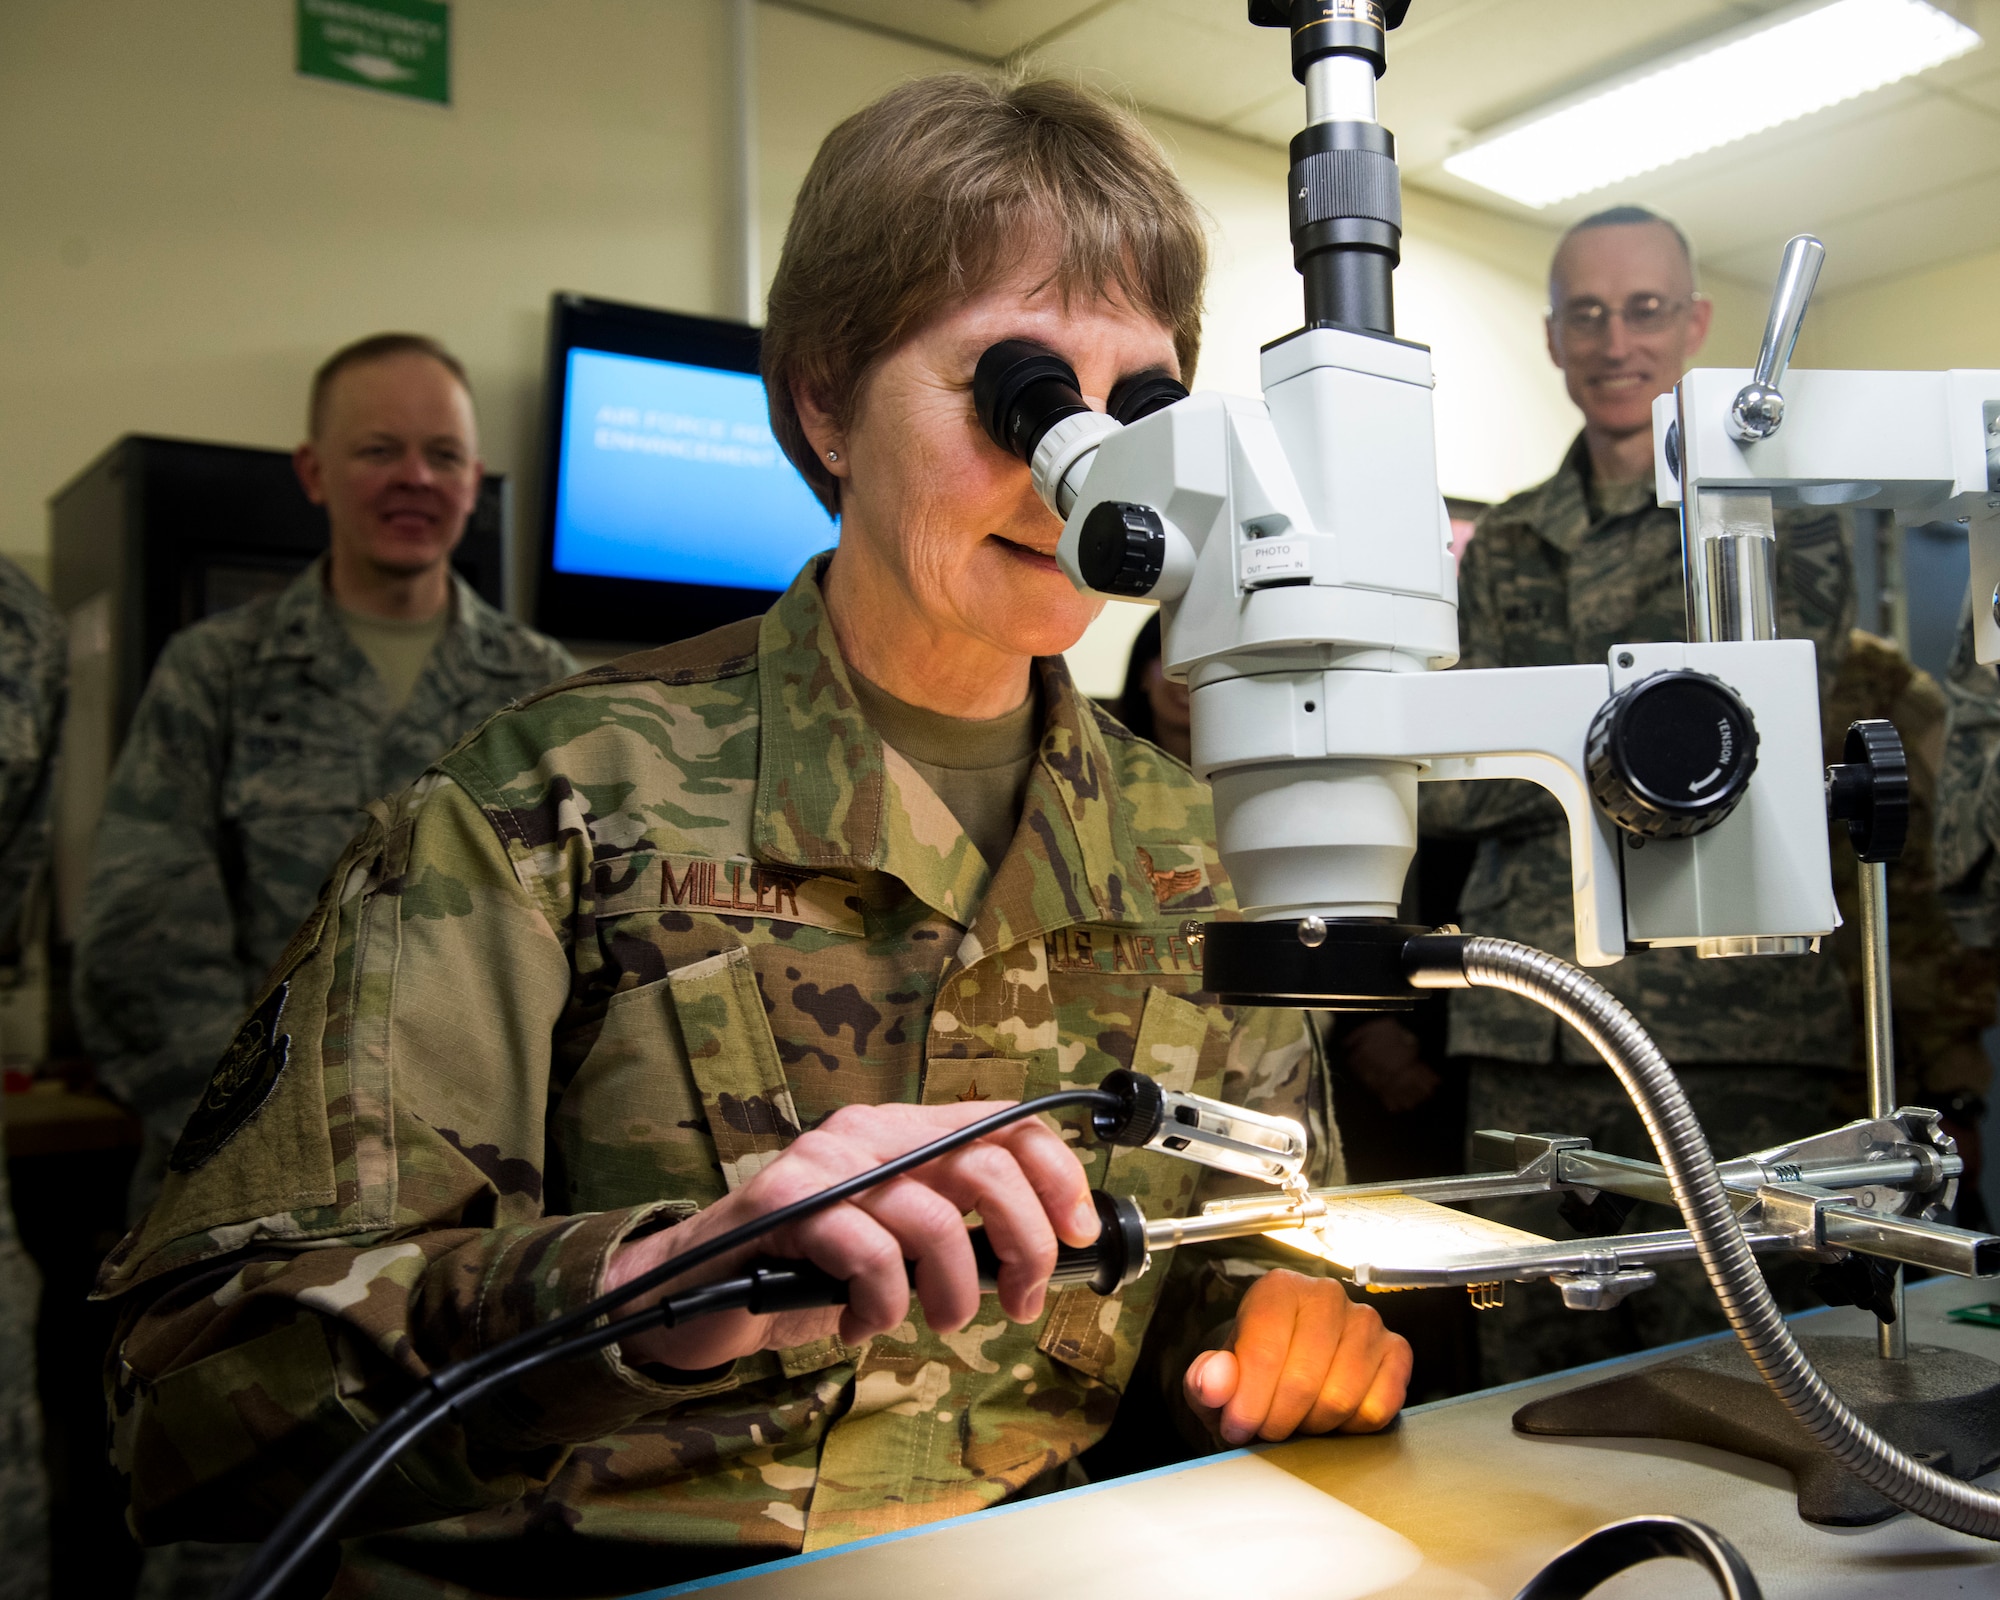 U.S. Air Force Gen. Maryanne Miller, Air Mobility Command commander, views a computer chip through a microscope in the Air Force Repair Enhancement Program office at Fairchild Air Force Base, Washington, March 27, 2019. A key message during Miller’s visit was the importance of adopting an innovative mindset and creating a culture that empowers Airmen to experiment and present solutions to problems. (U.S. Air Force photo by Airman 1st Class Lawrence Sena)